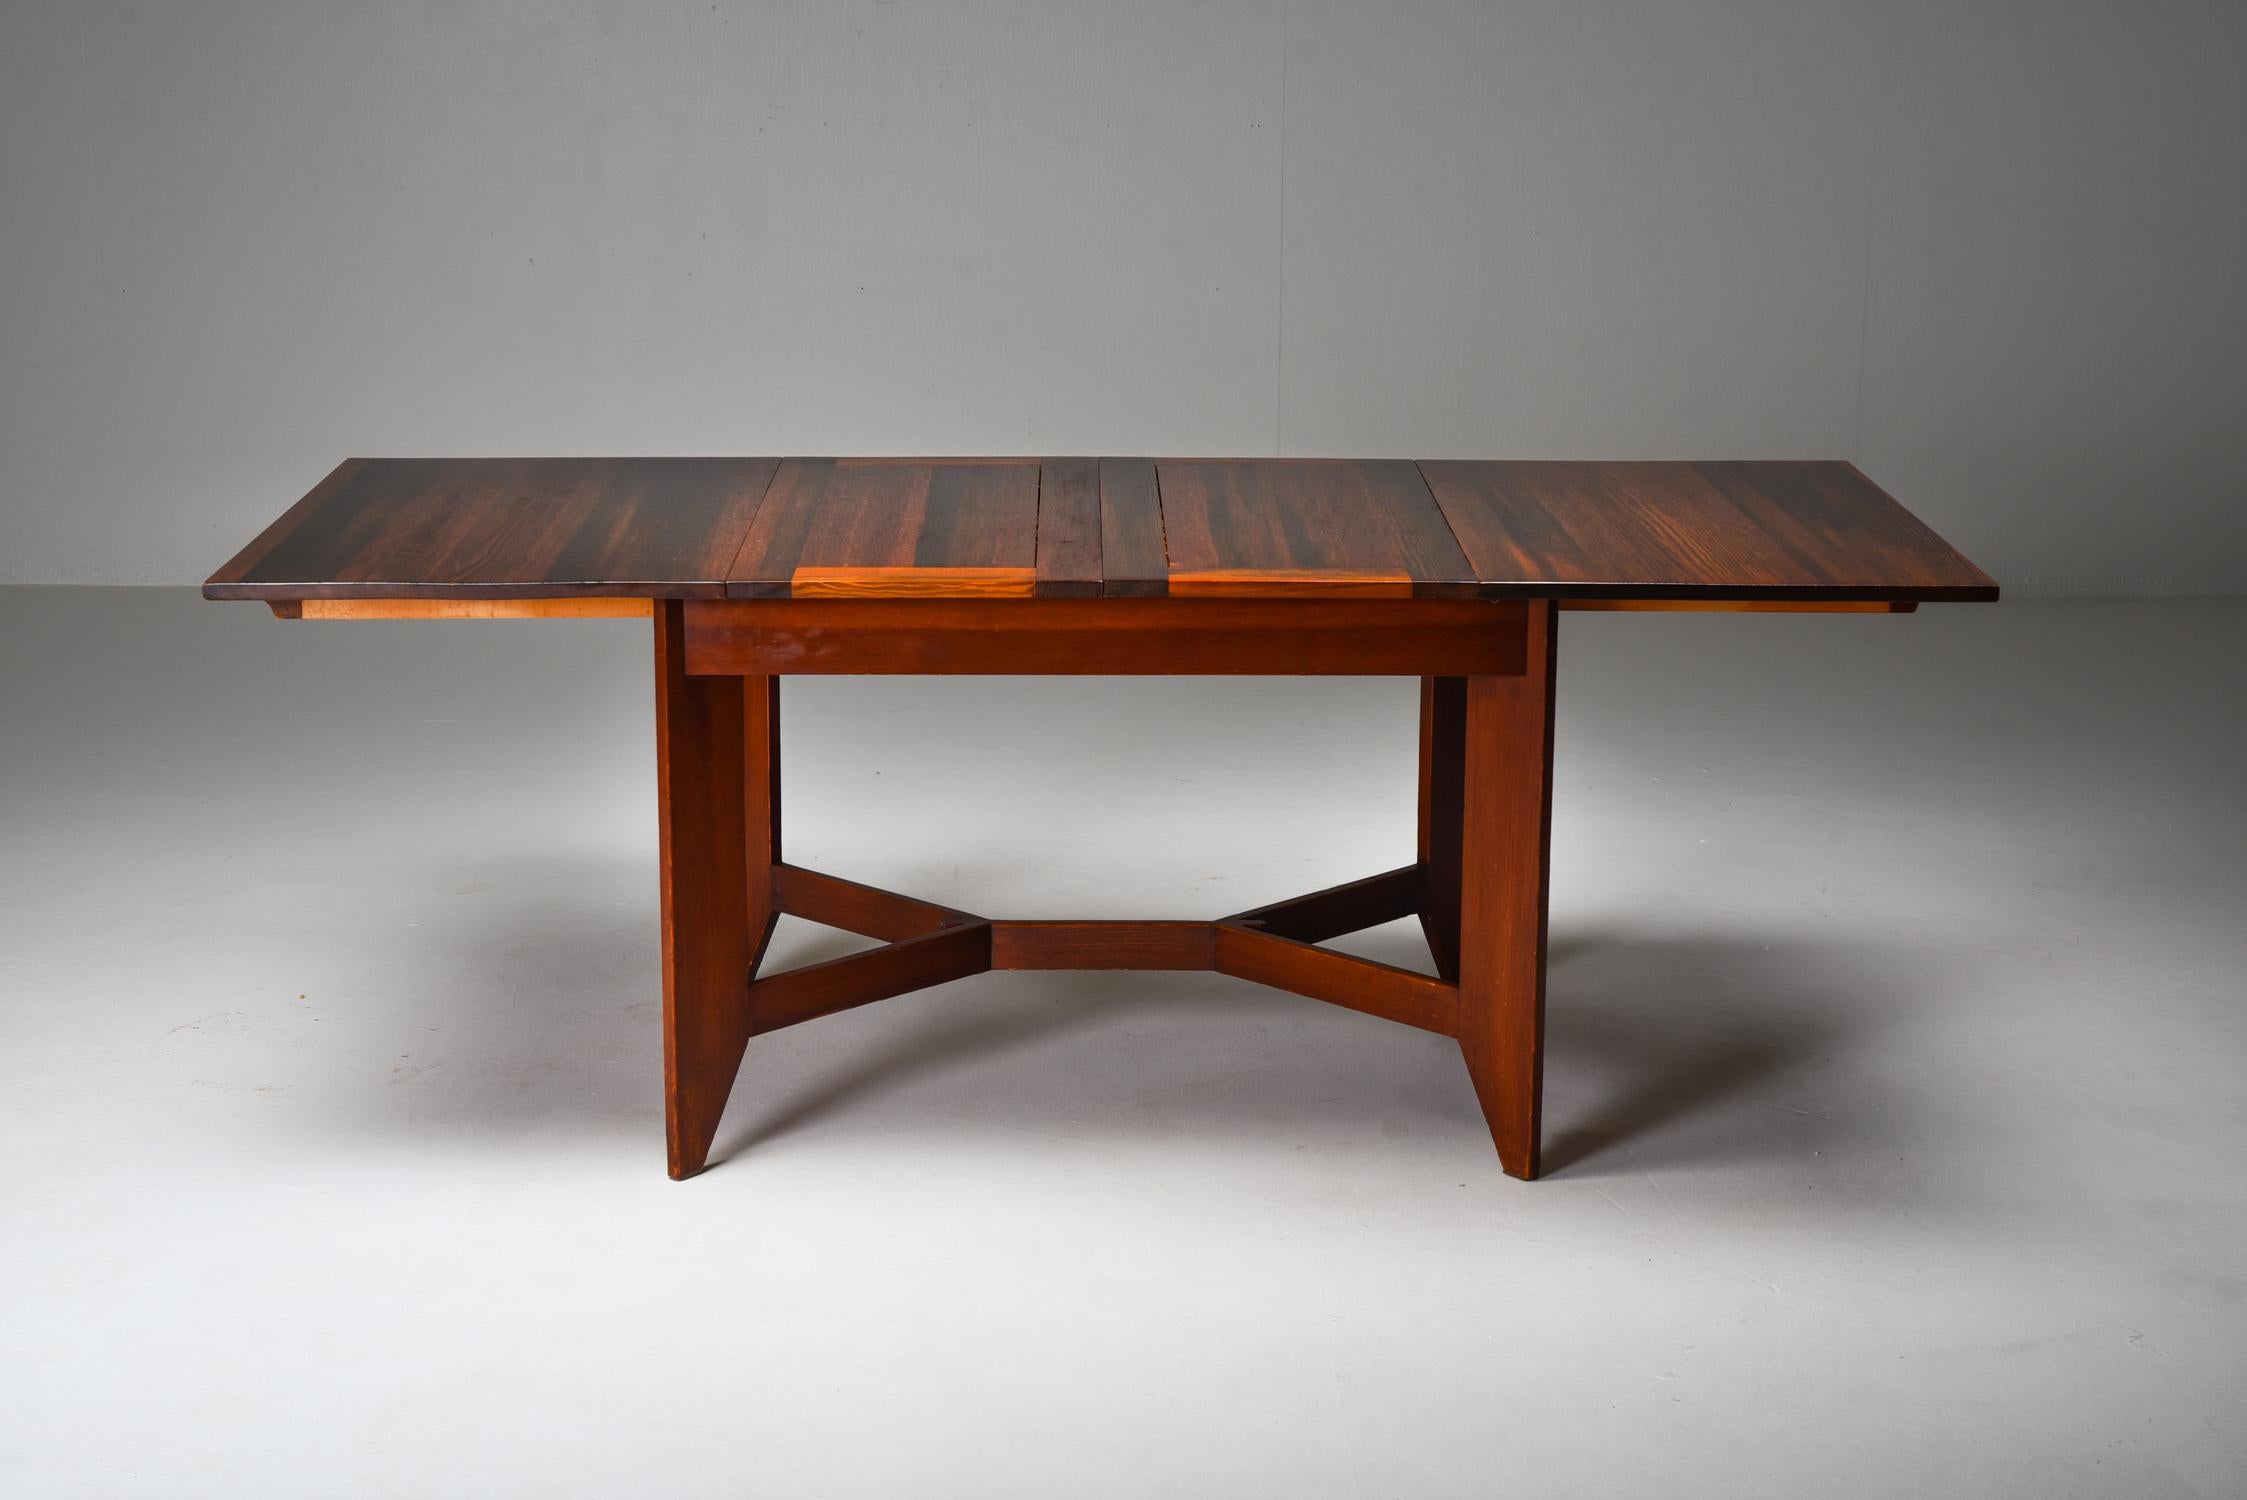 Modernist extendable dining table, Hendrik Wouda, H. Pander, Netherlands 1930

The table has two extension leafs.
width varies from 118 cm to 206 cm 

The Interbellum, the period between the two World Wars, was a time when culture Dutch